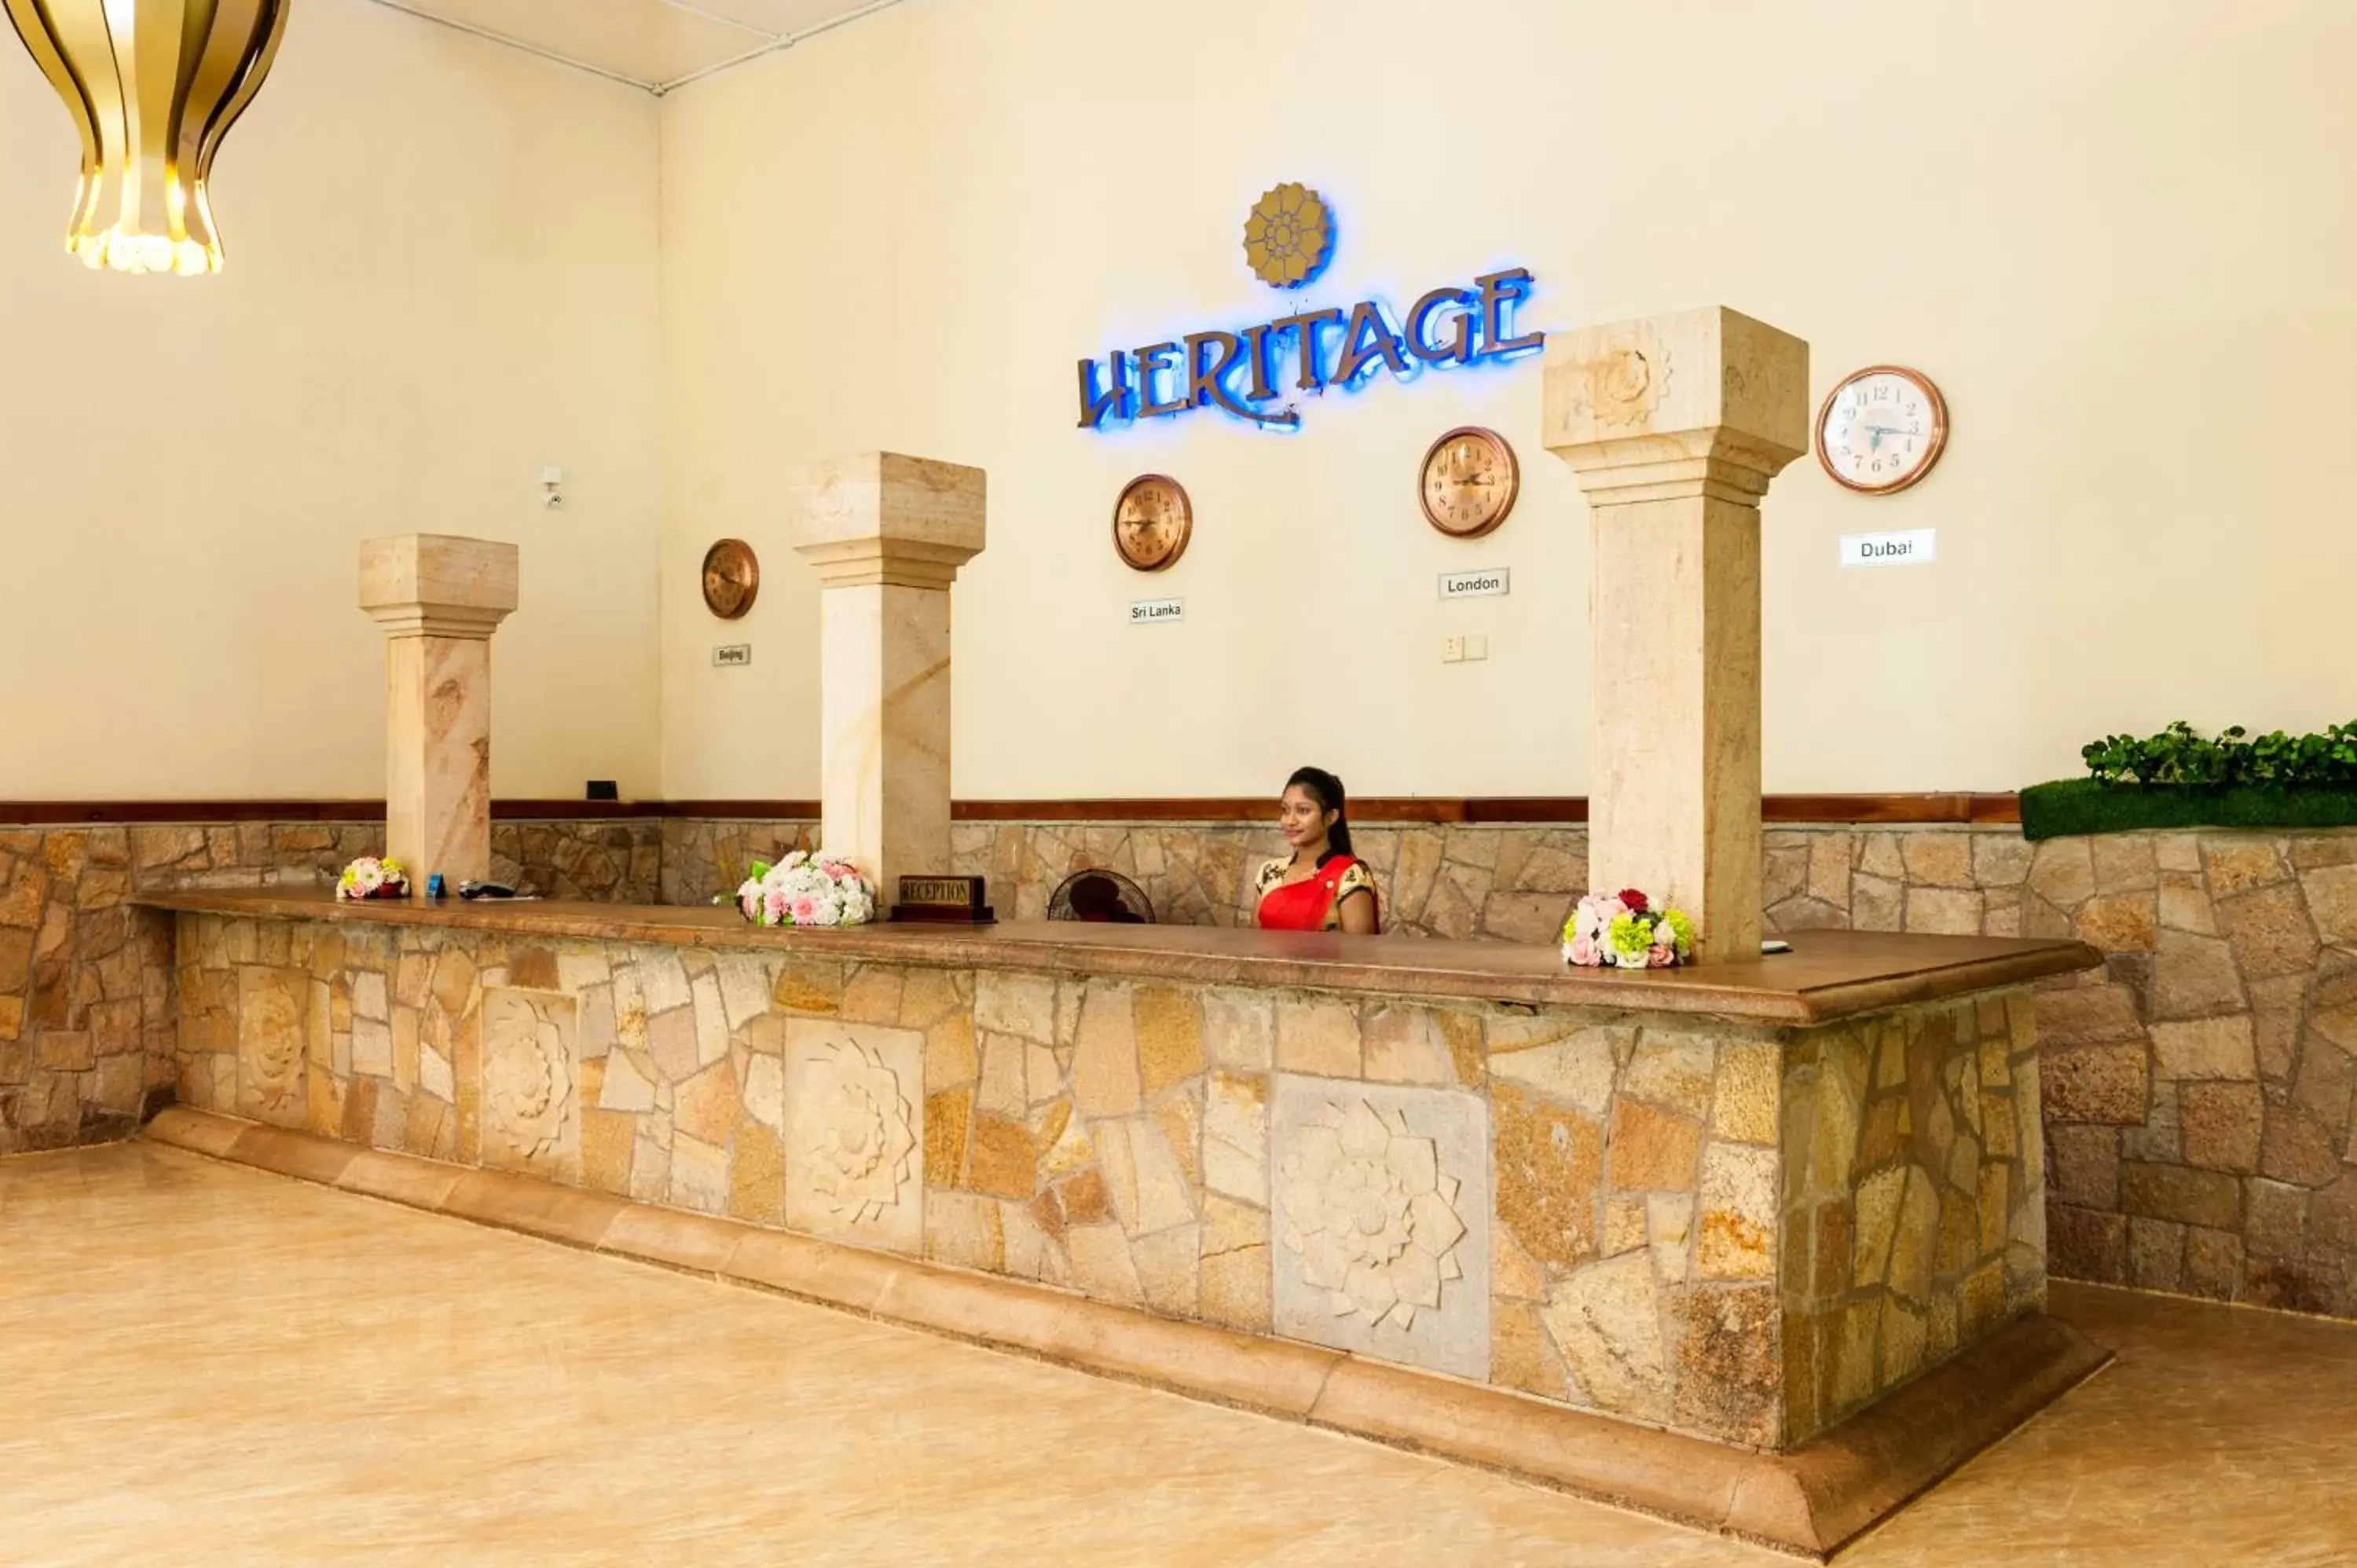 Staff in Heritage Hotel